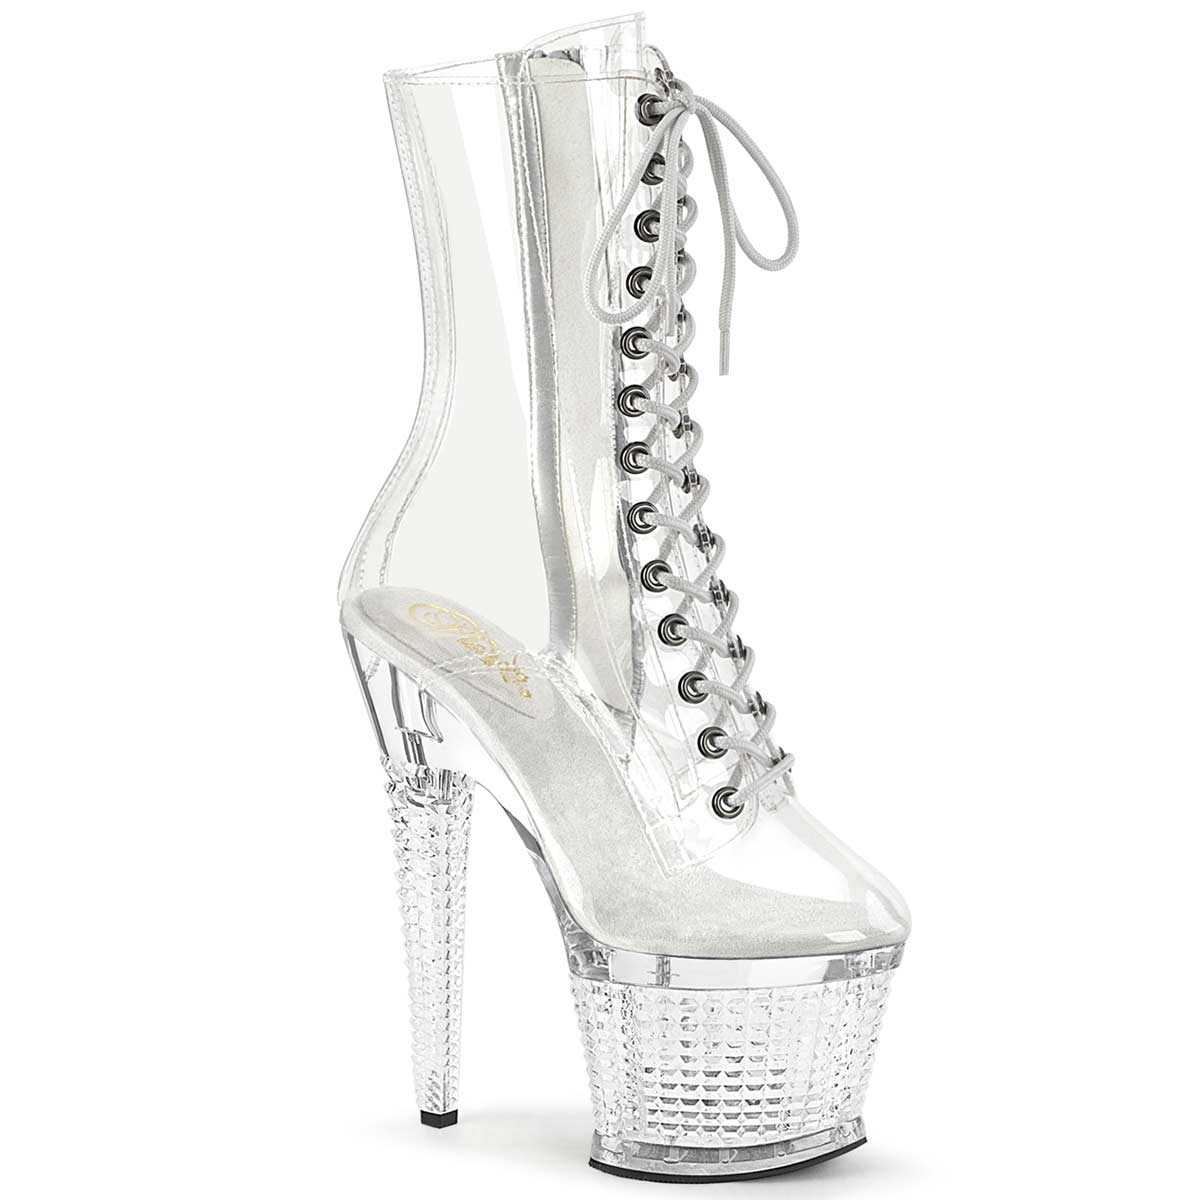 Pleaser Spectator-1040C - Clear in Sexy Boots - $54.55